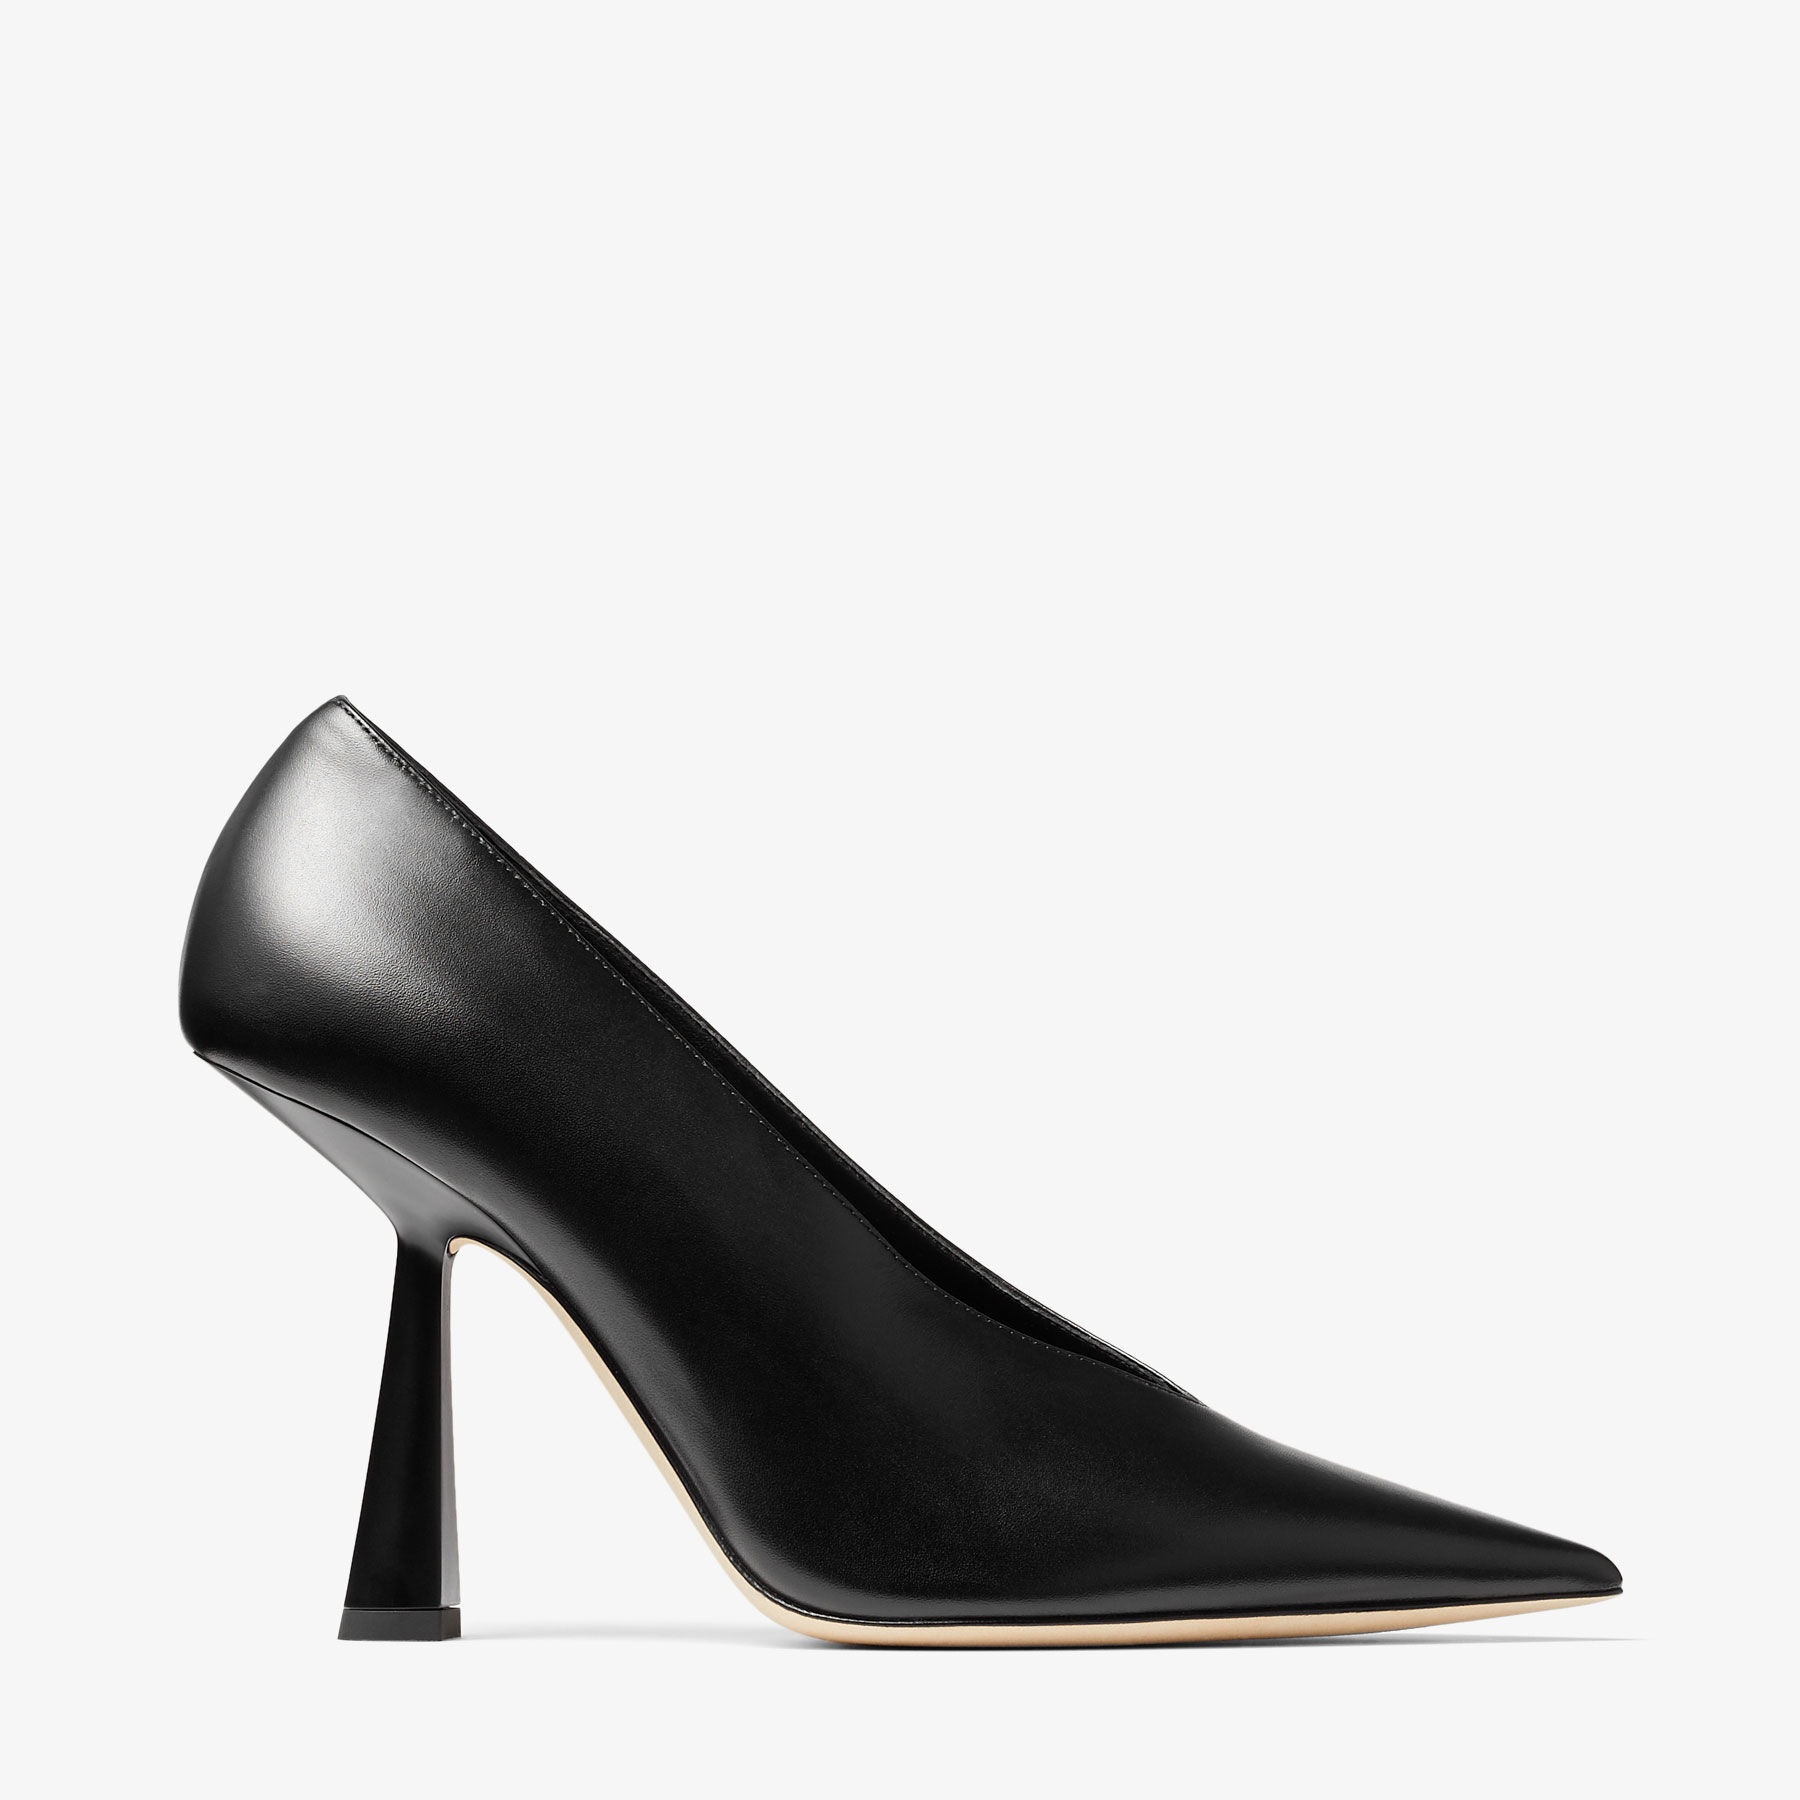 Maryanne 100
Black Calf Leather Pointed-Toe Pumps - 1